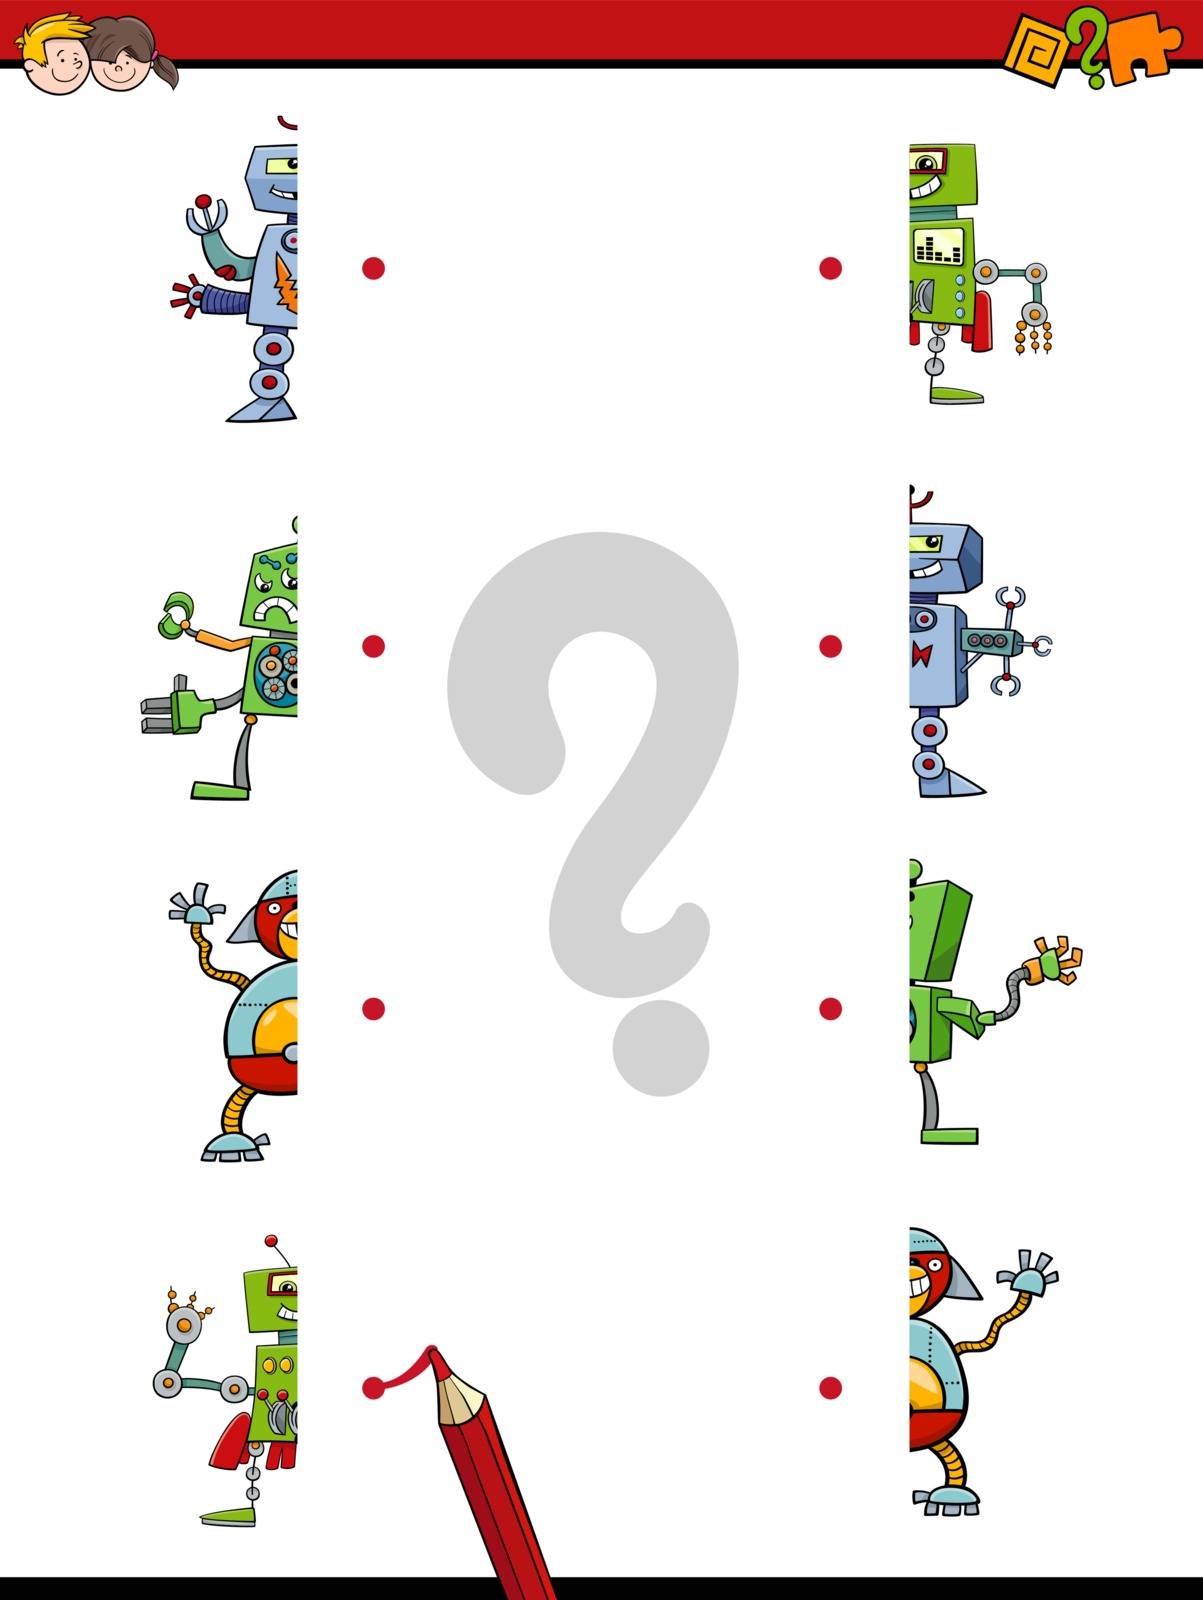 Cartoon Illustration of Educational Game of Matching Halves with Robot Characters